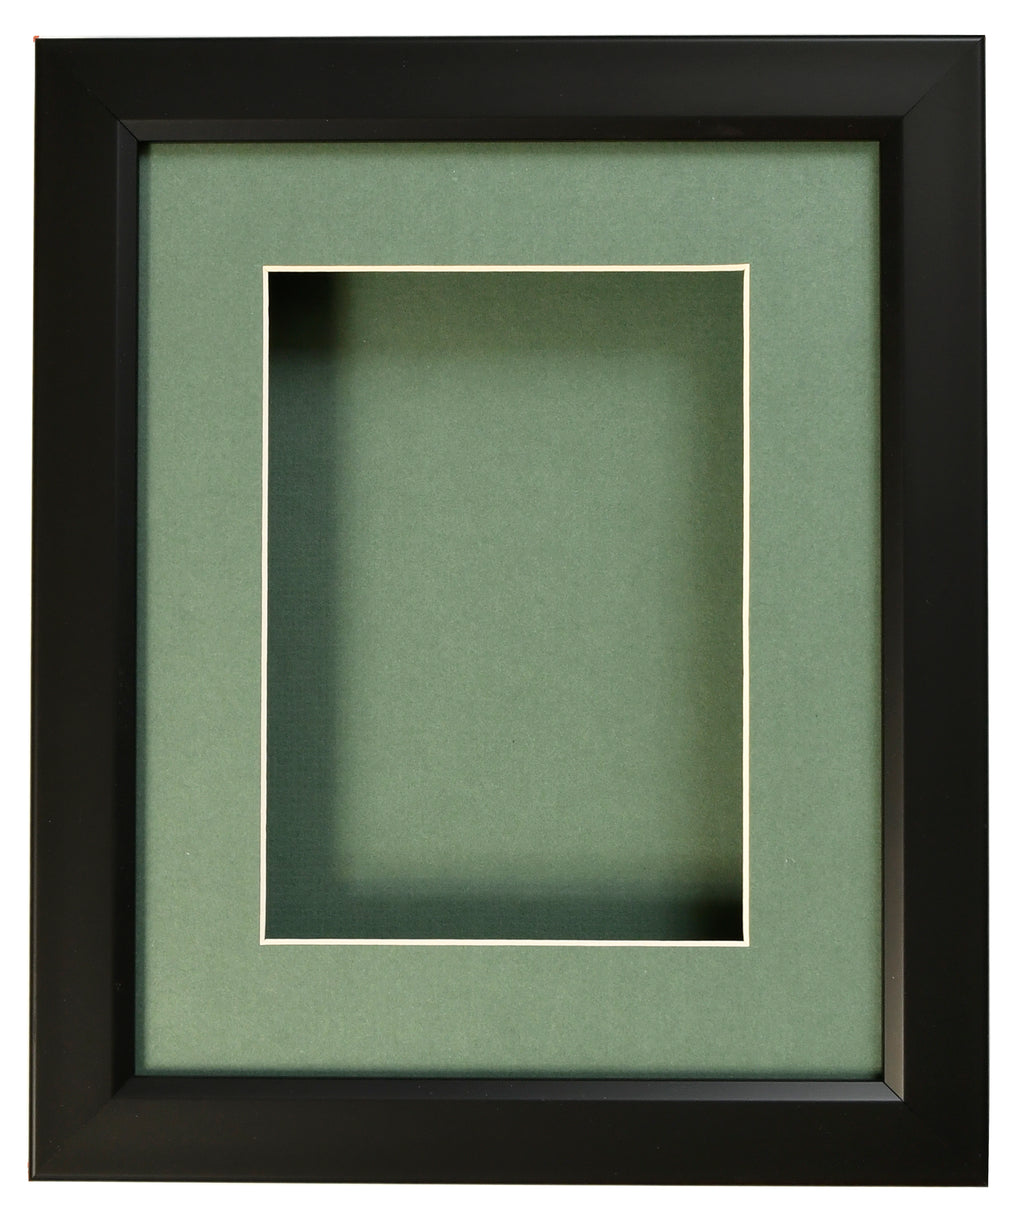 SHADOW BOX FRAME FOR OBJECTS - BLACK FRAME - GREEN MAT - CLEAR GLASS -  1" DEPTH